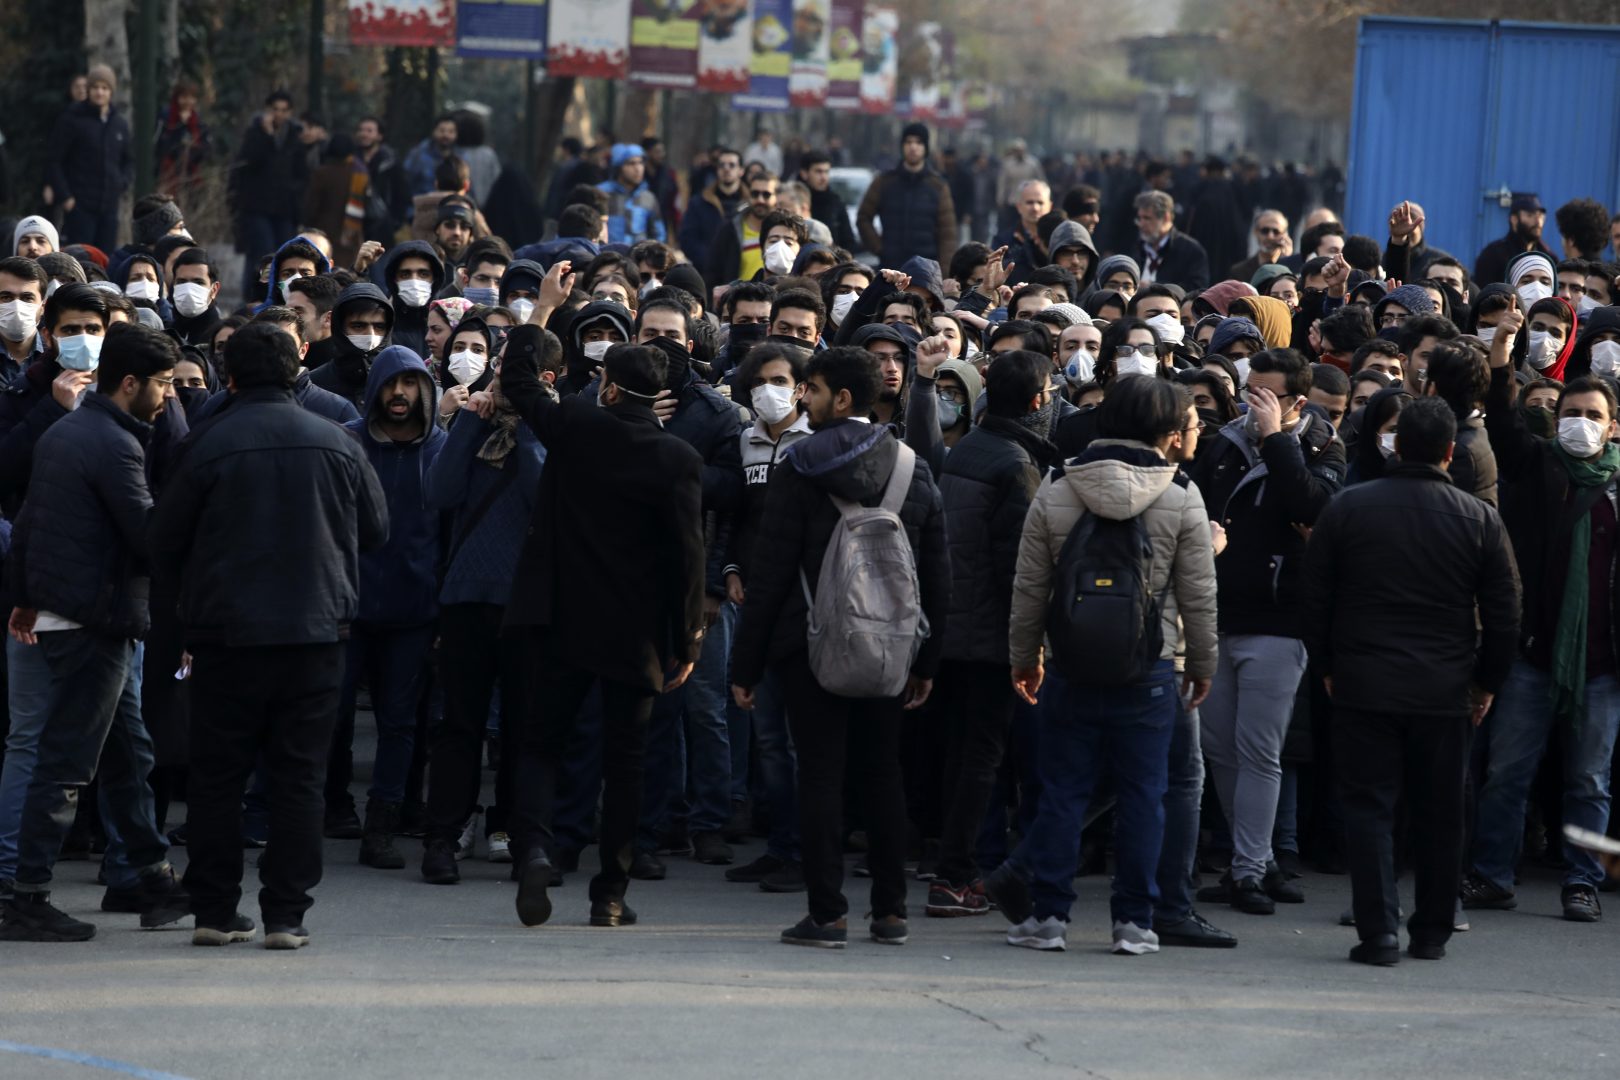 Anti-government protesters attend a demonstration blaming the government for the delayed announcement of the unintentional downing of a Ukrainian plane last week, at the Tehran University campus in Tehran, Iran, Tuesday, Jan. 14, 2020. Anti-government protesters are angered by the late announcement of the mistake by officials and military, saying an apology is not enough and all those responsible must be held accountable. Pro-government protesters say the Revolutionary Guard should not be undermined for this mistake and accuse foreign powers of stirring up unrest in the country. 